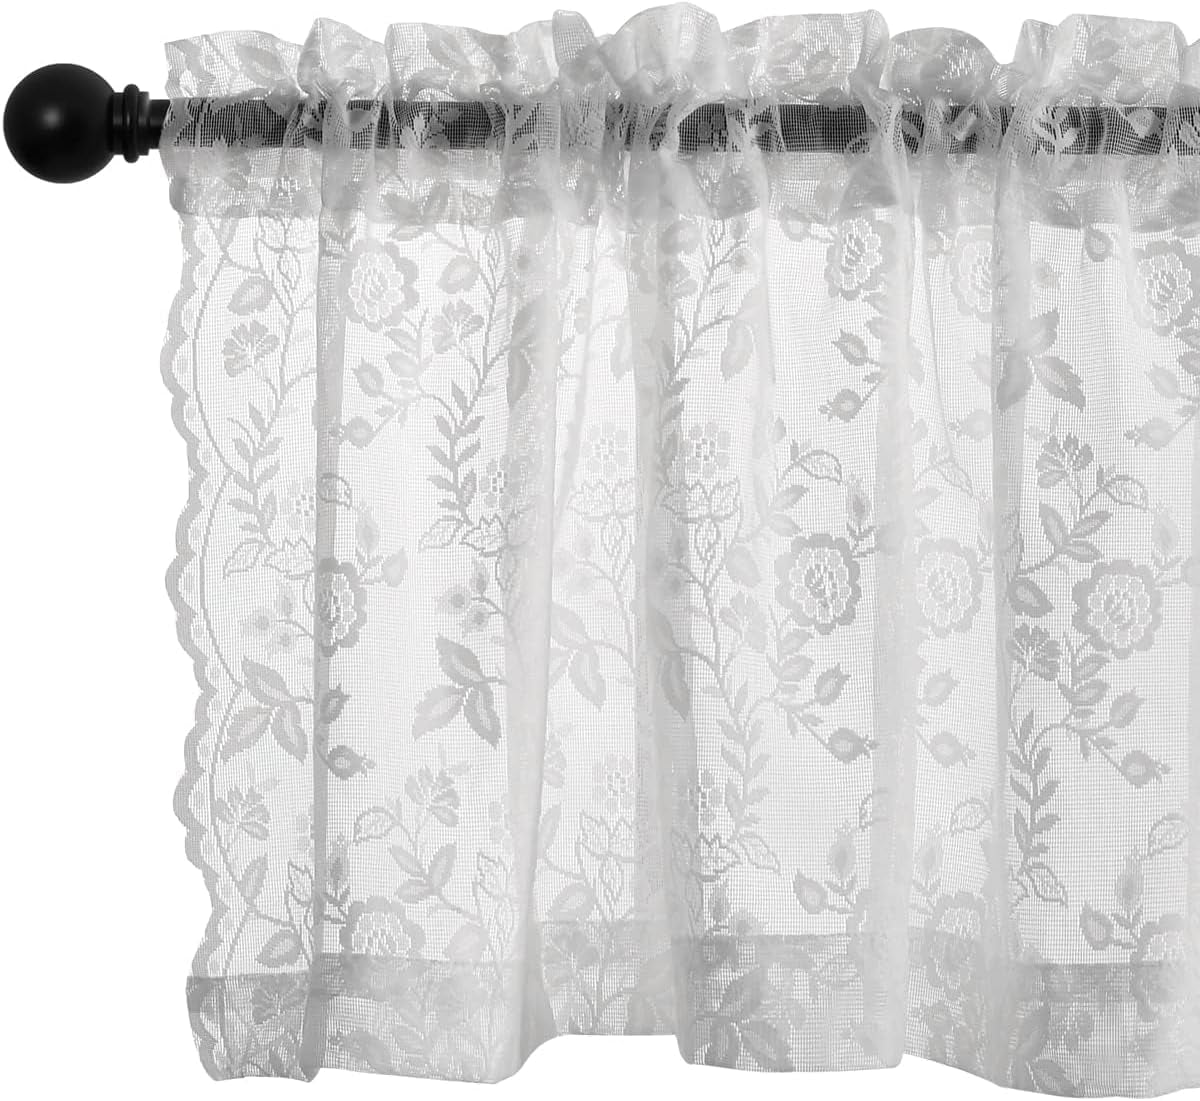 FINECITY Lace Curtains Country Rustic Floral Sheer Curtains for Living Room 72 Inch Length Drapes Vintage Floral Pattern Farmhouse Privacy Light Filtering Sheer Curtain 2 Panels, 52 X 72 Inch, Grey  Keyu Textile White W52 X L18 Inch 